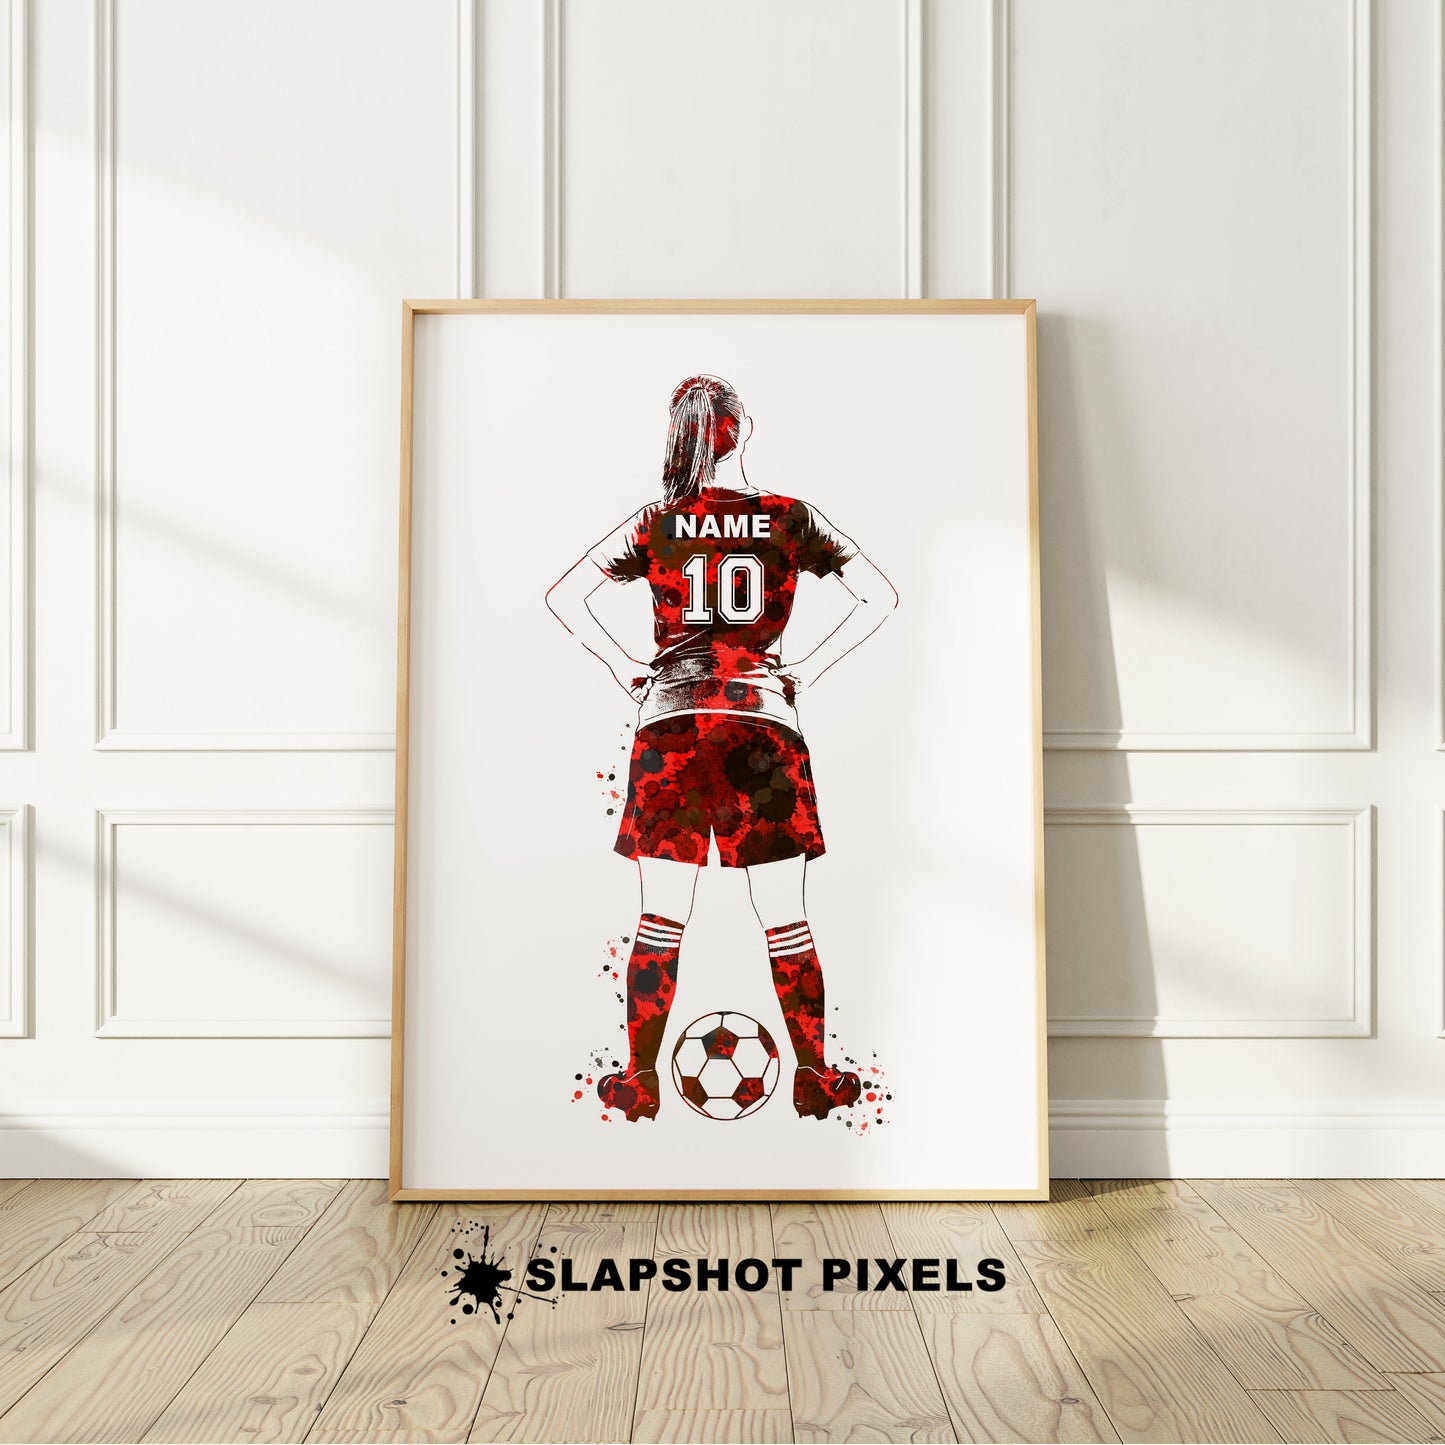 Personalized soccer poster of a girl soccer player standing and a custom name and number on the soccer jersey. Perfect soccer gifts for girls, soccer team gifts, soccer coach gift, soccer wall art décor, football prints and soccer bedroom ideas and soccer birthday gifts for girls and teens.